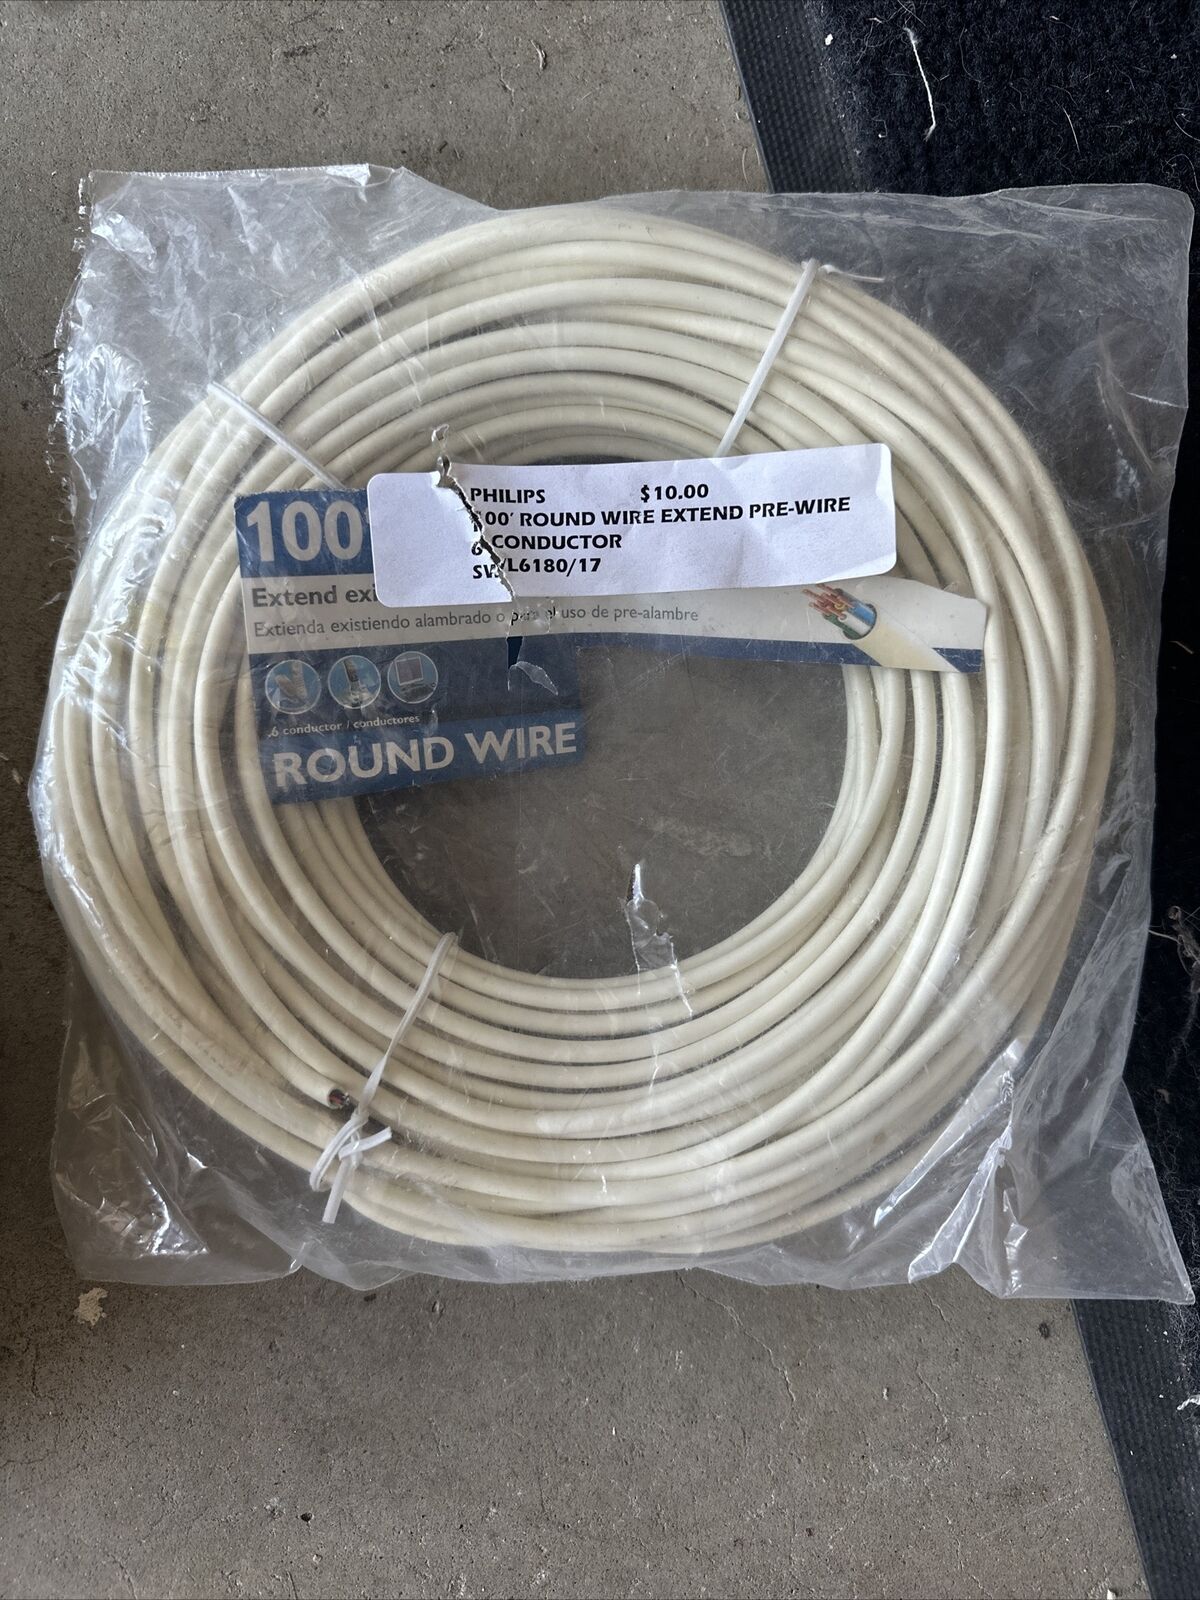 100’ philips round wire extend pre wire or other diy